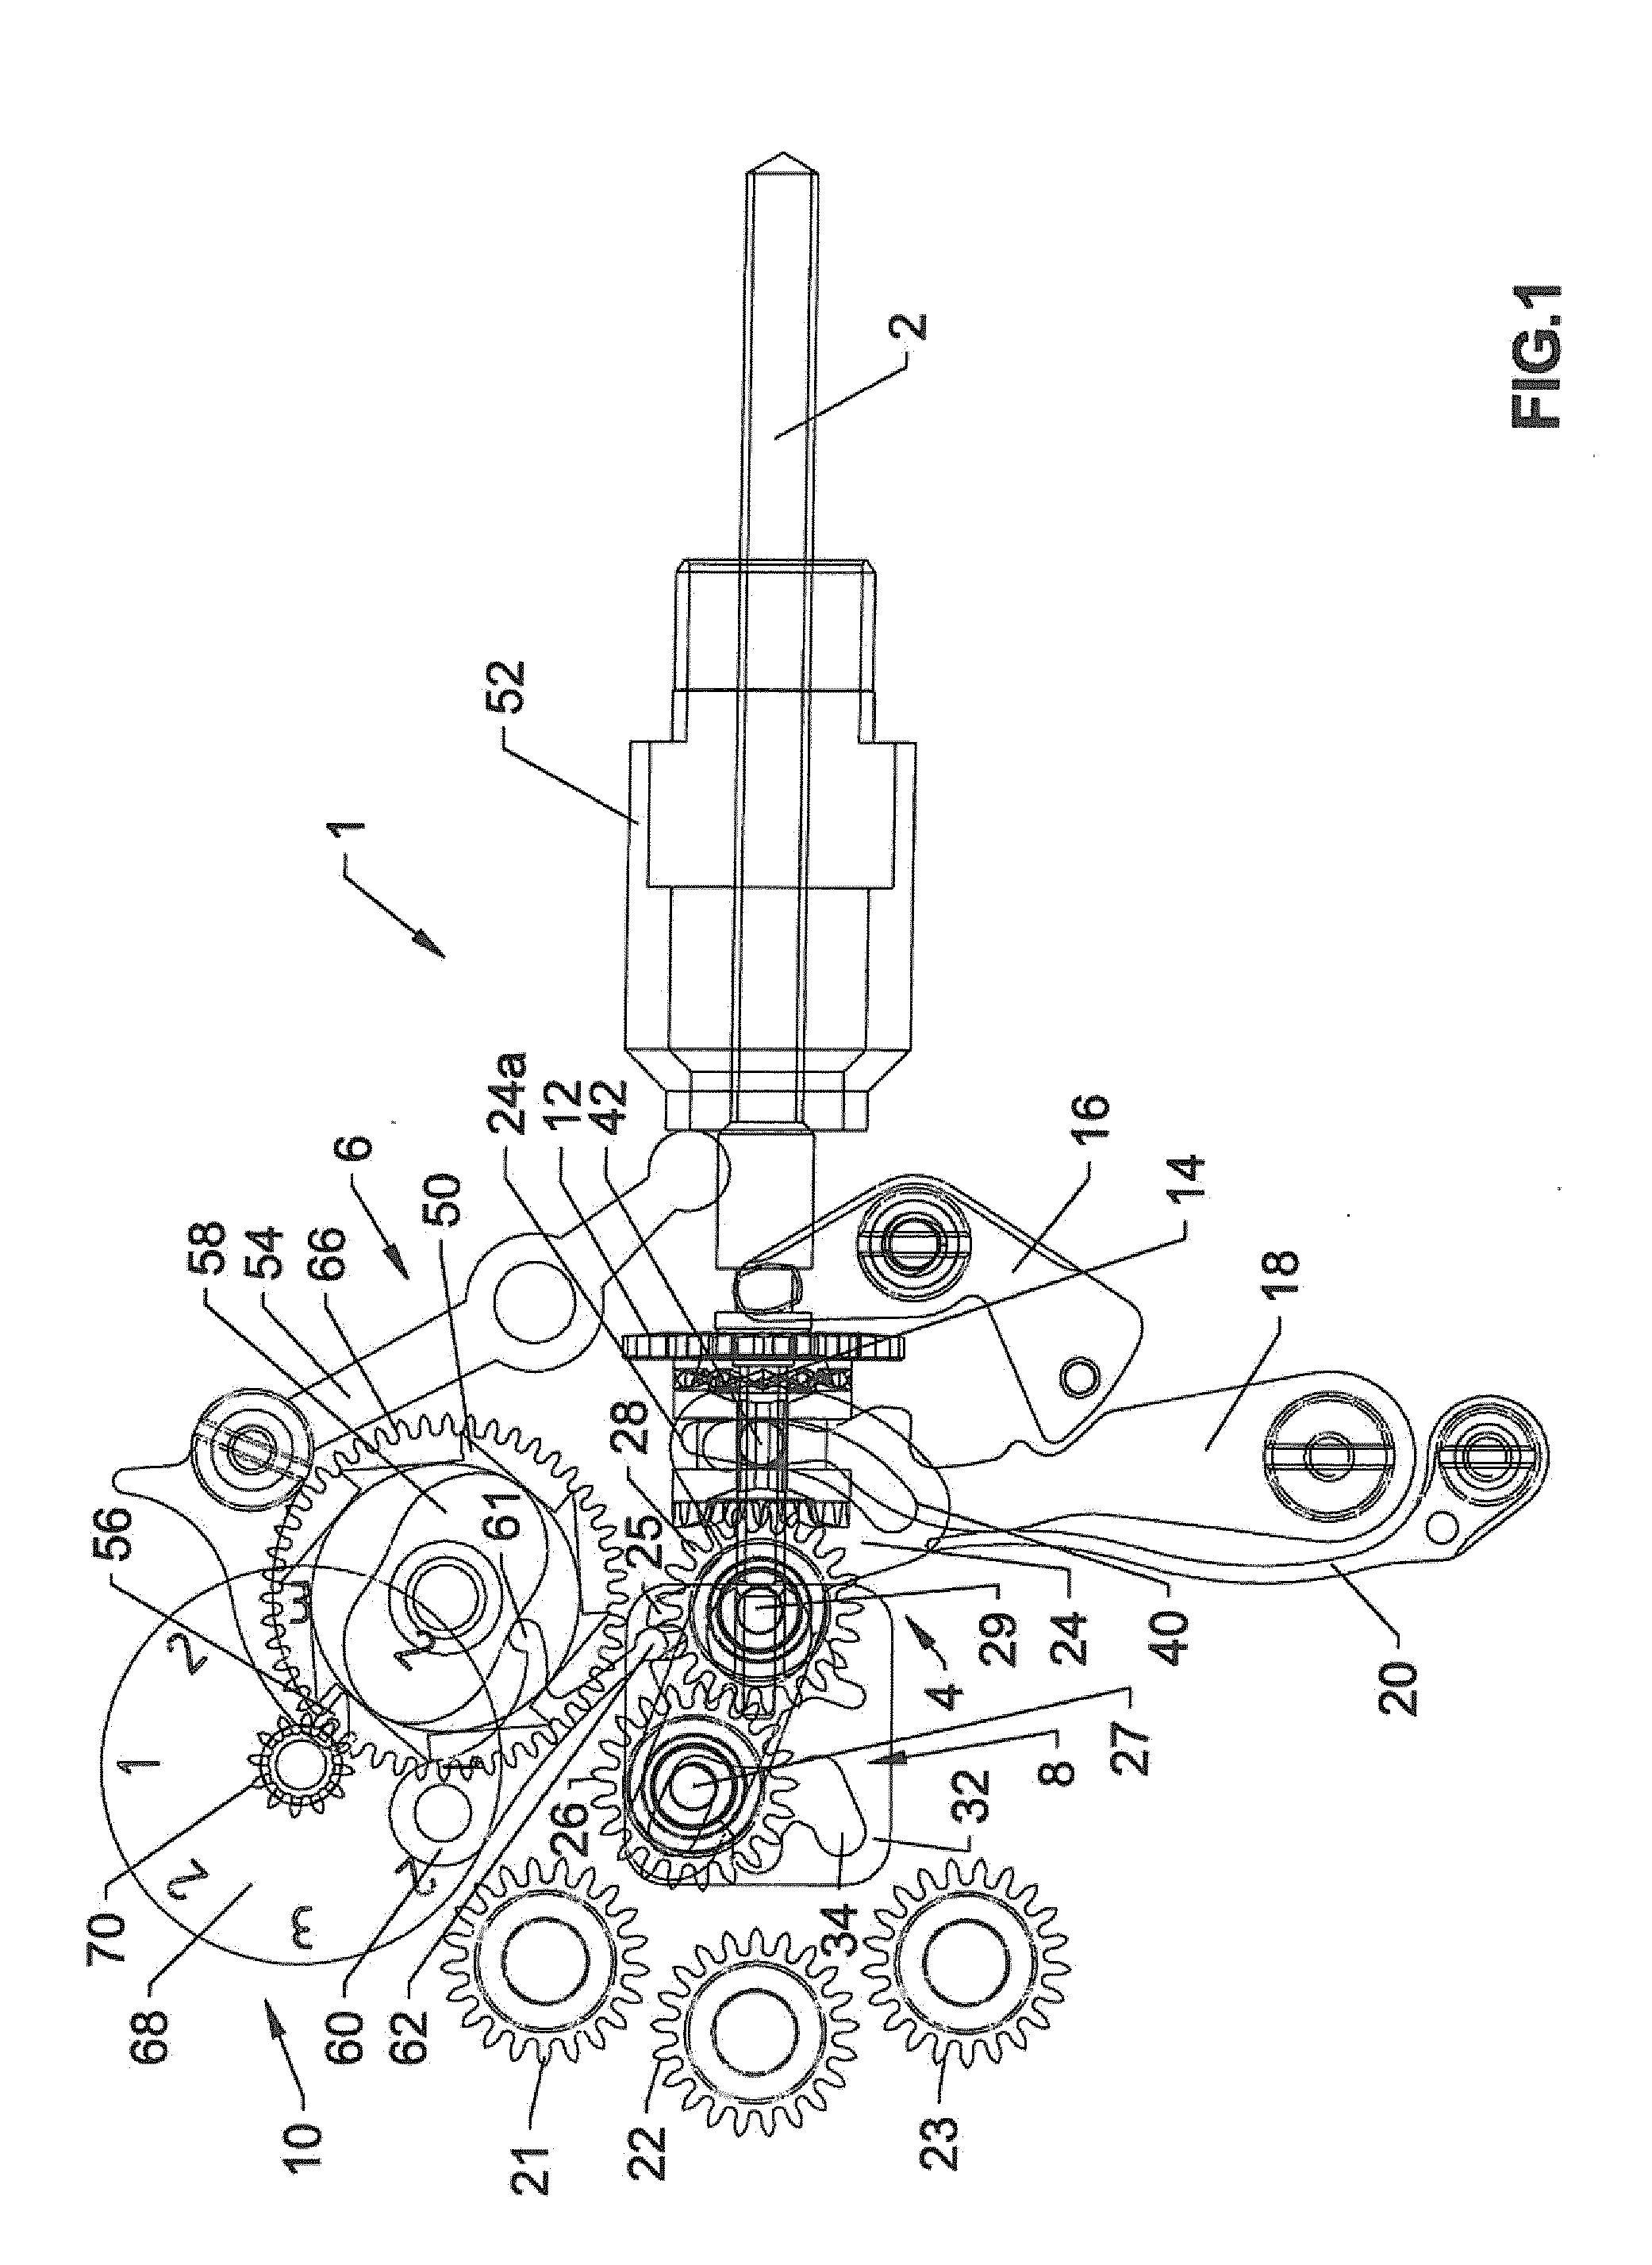 Mechanism for selecting and actuating functions of a clockwork movement